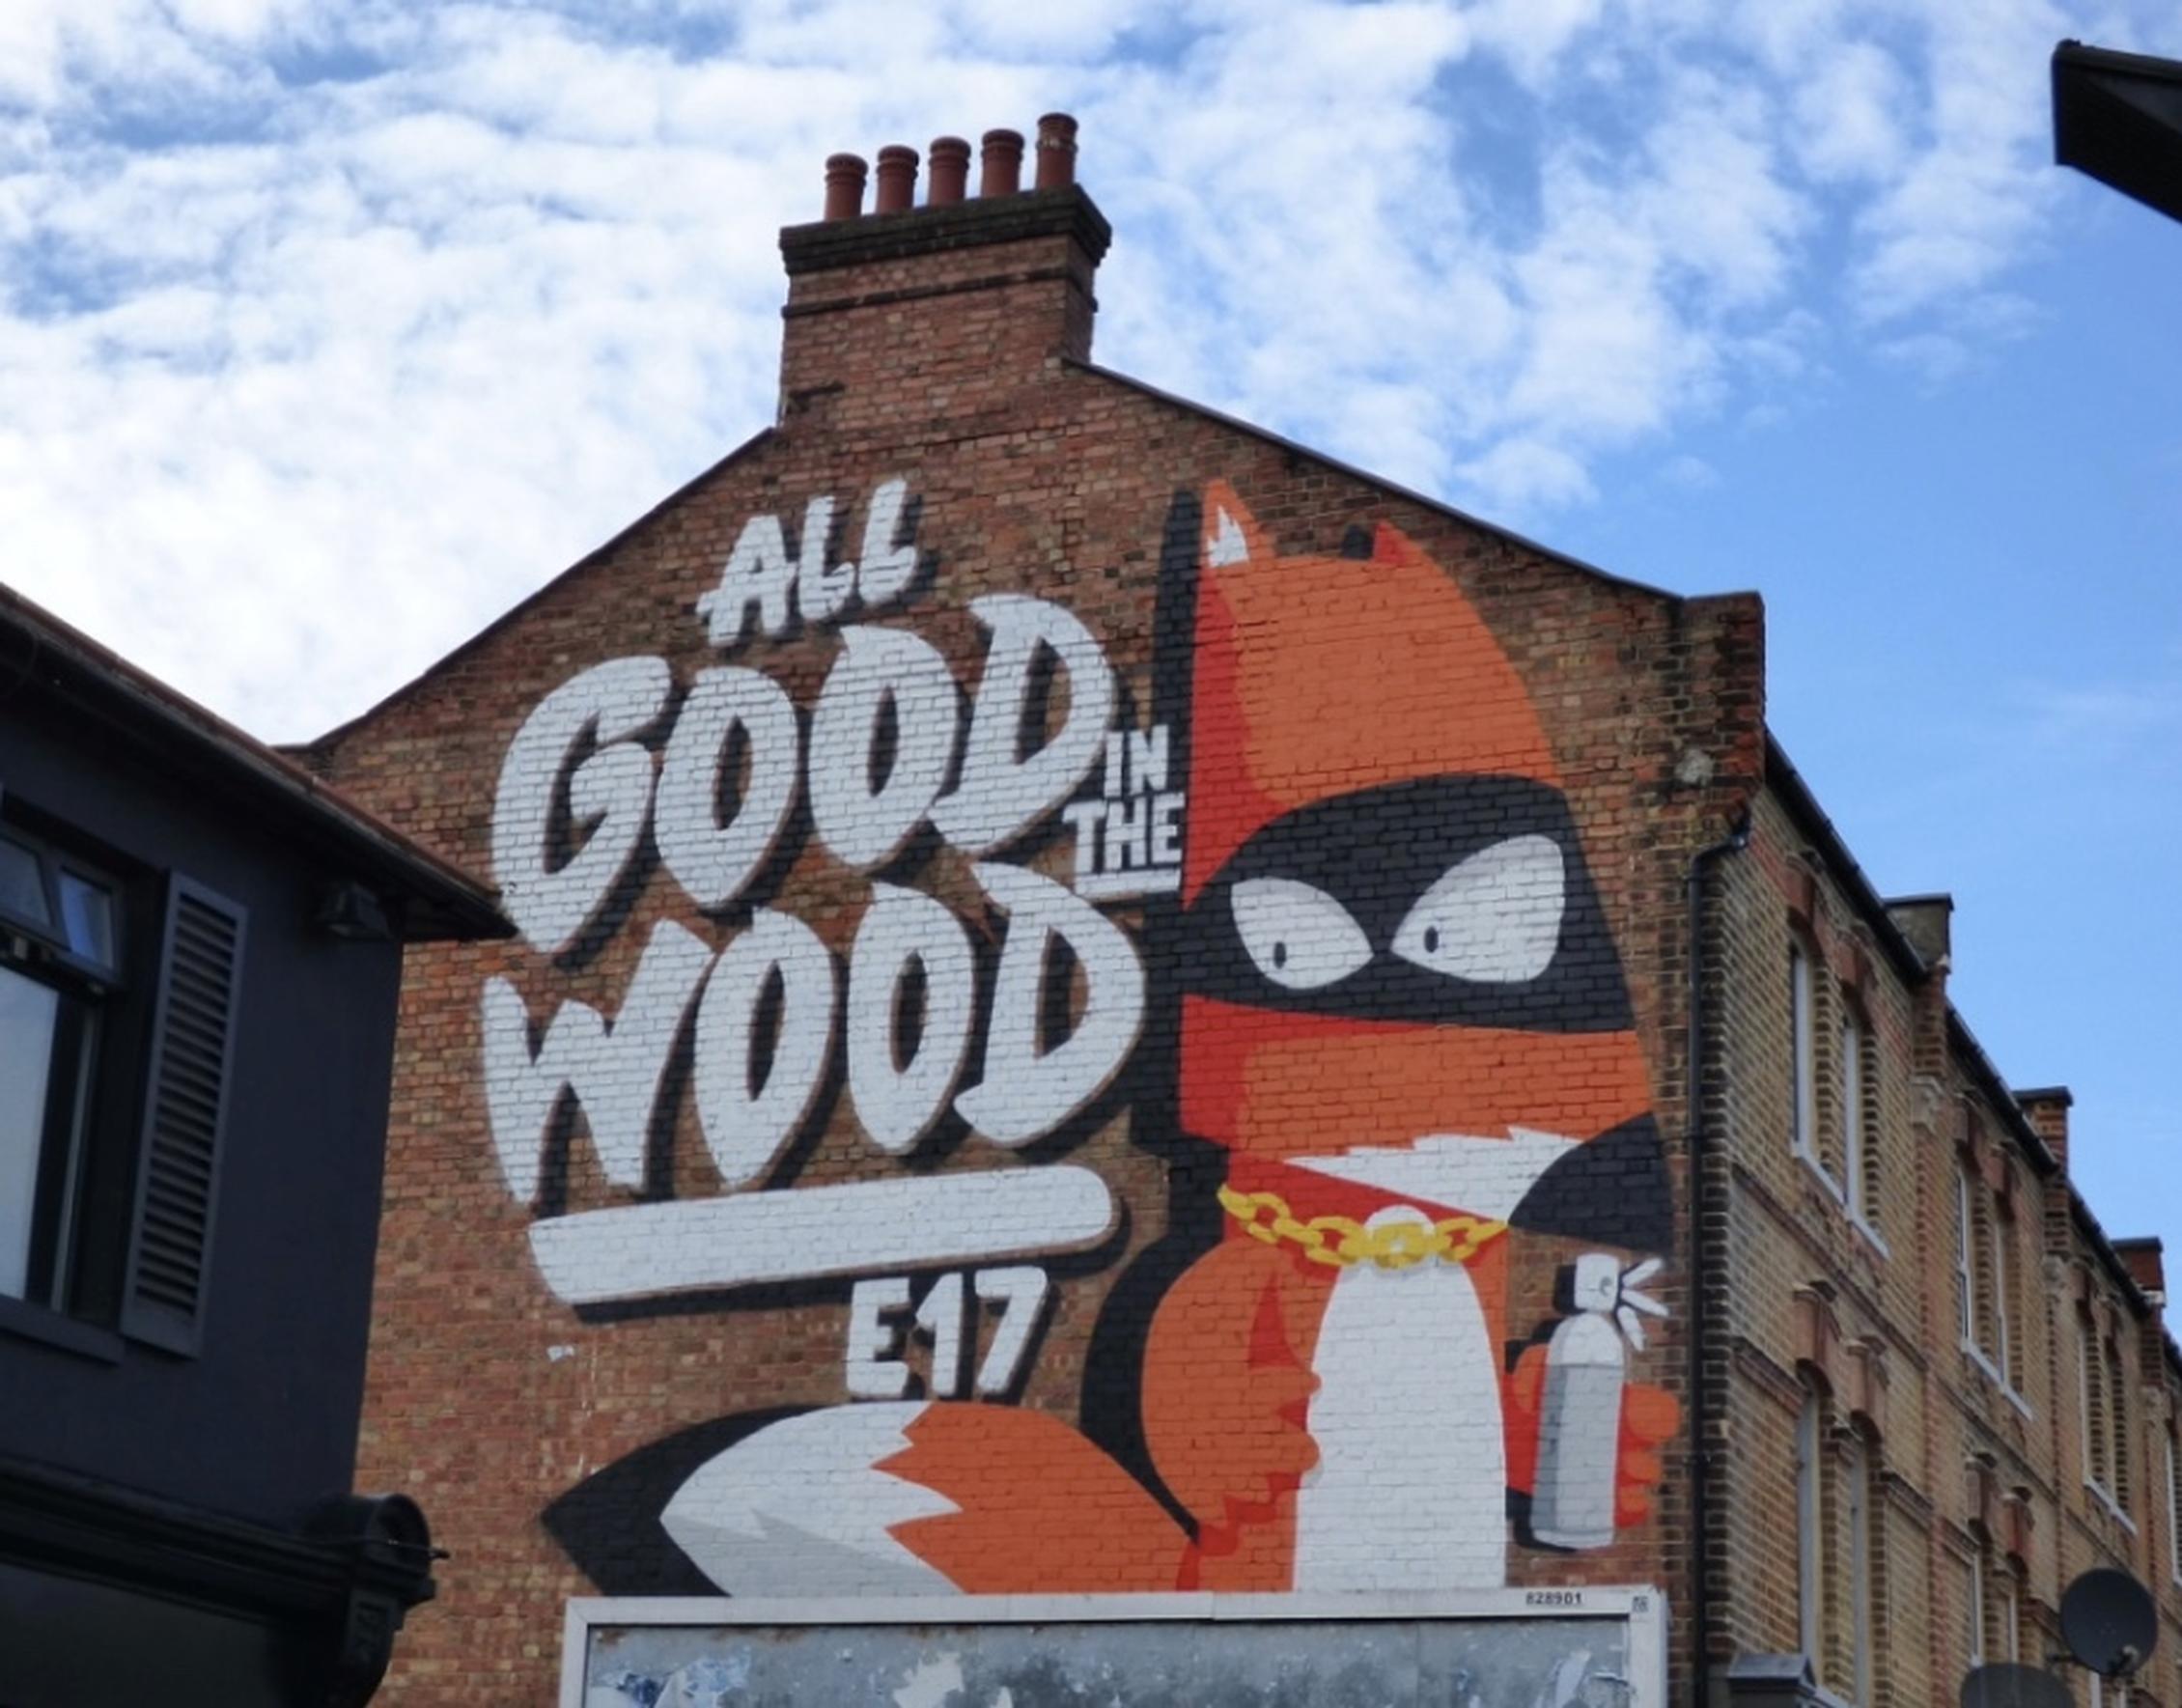 The Wood Street regeneration project in Walthamstow delivered over 50 shop front improvements and new art installations, resulting in a 50% rise in sales among participating businesses